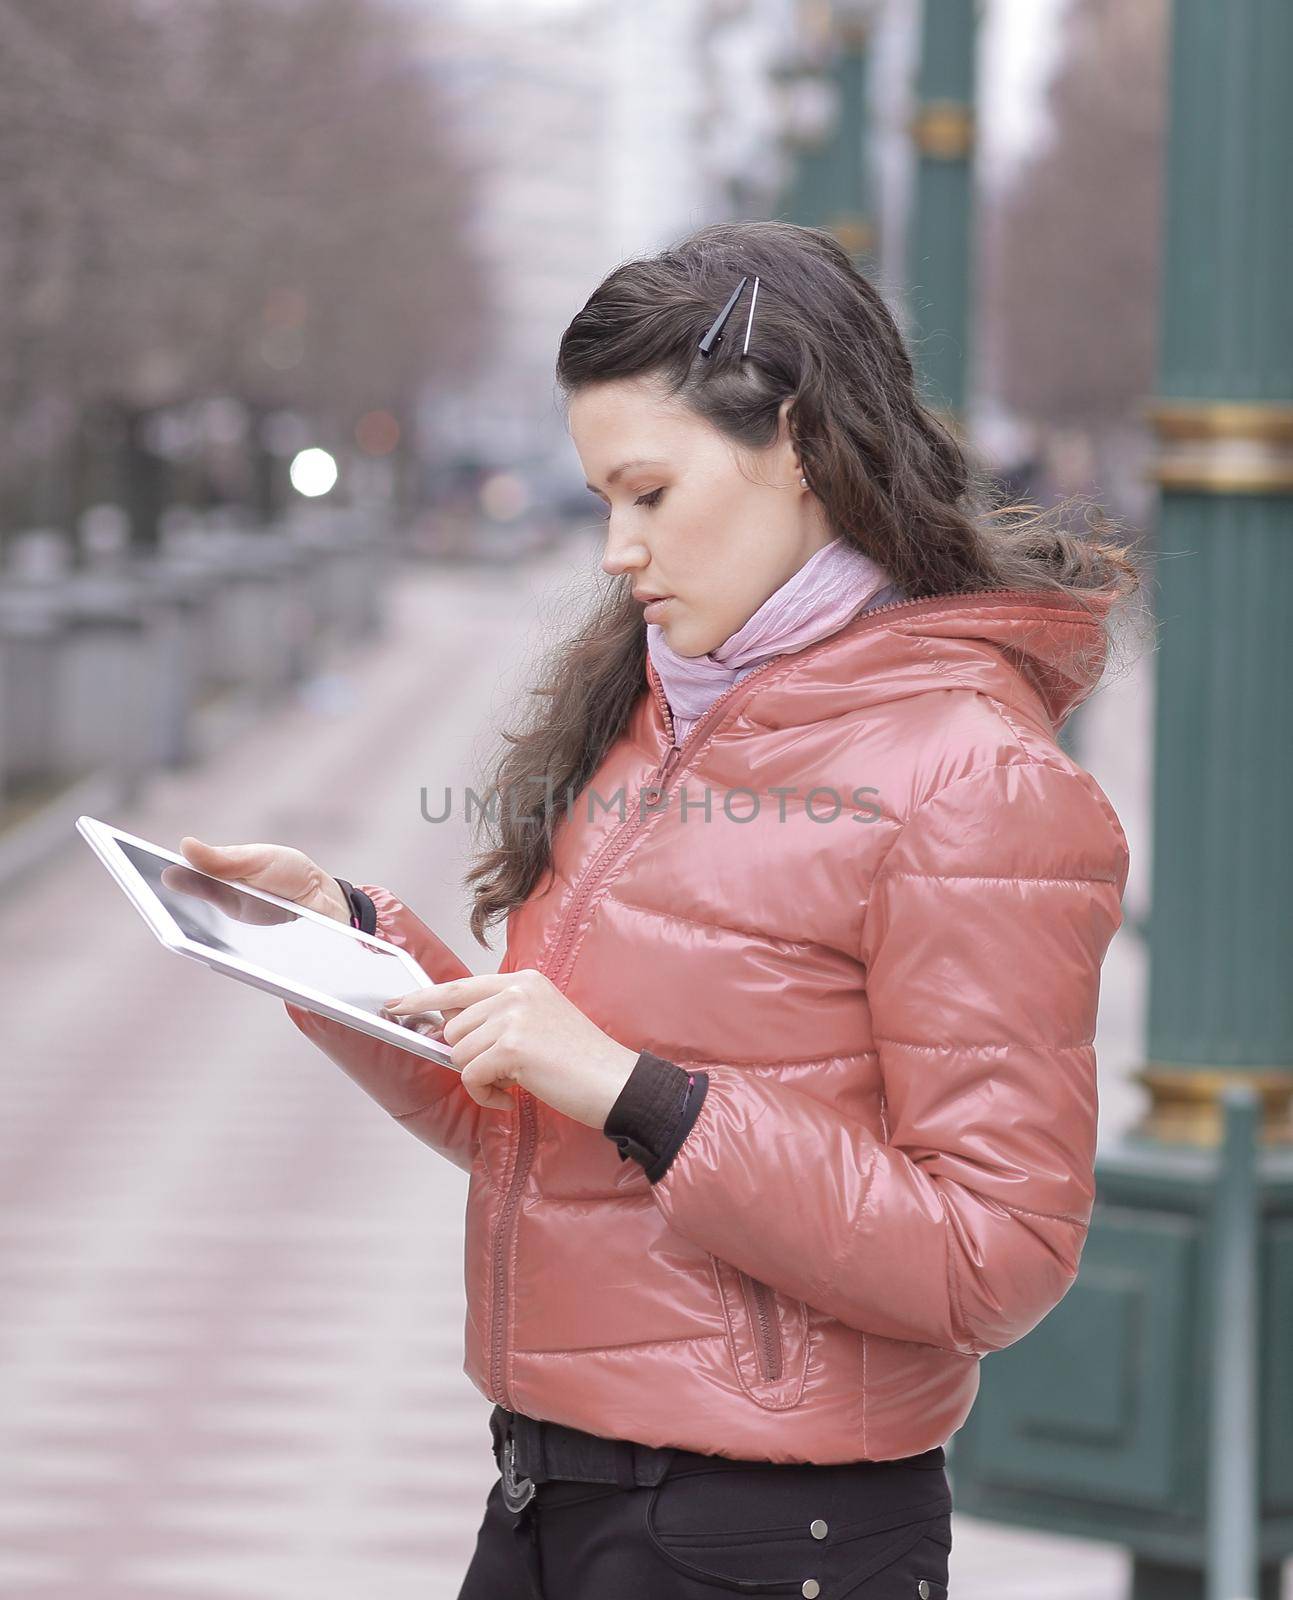 smiling woman looking at digital tablet screen by SmartPhotoLab